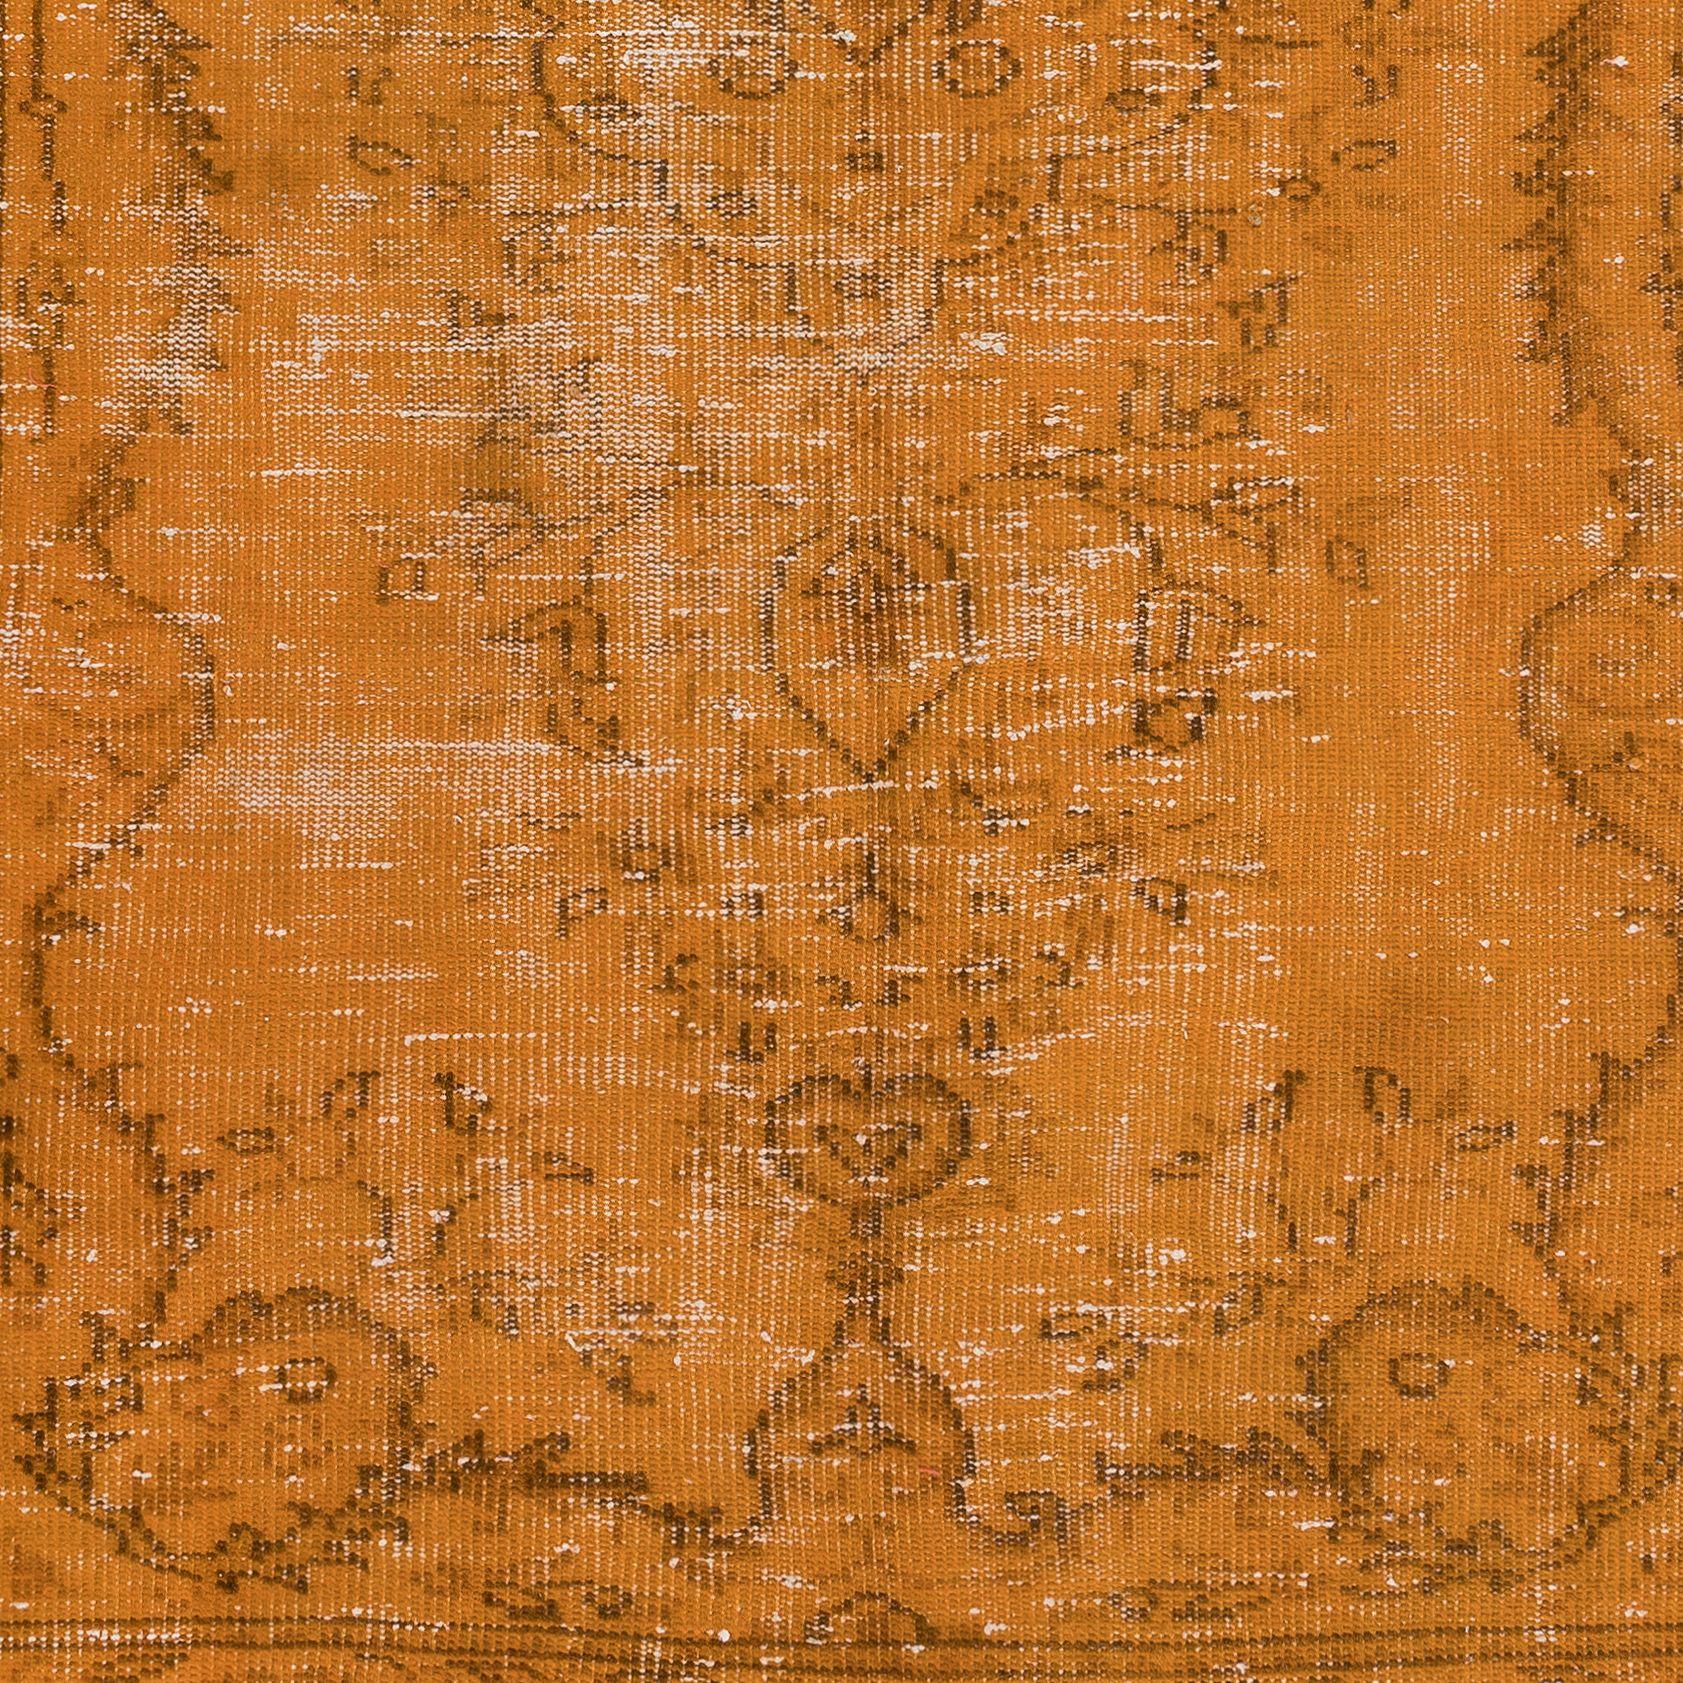 Modern 4.5x7.7 Ft Vintage Orange Area Rug, Handwoven and Handknotted in Turkey For Sale